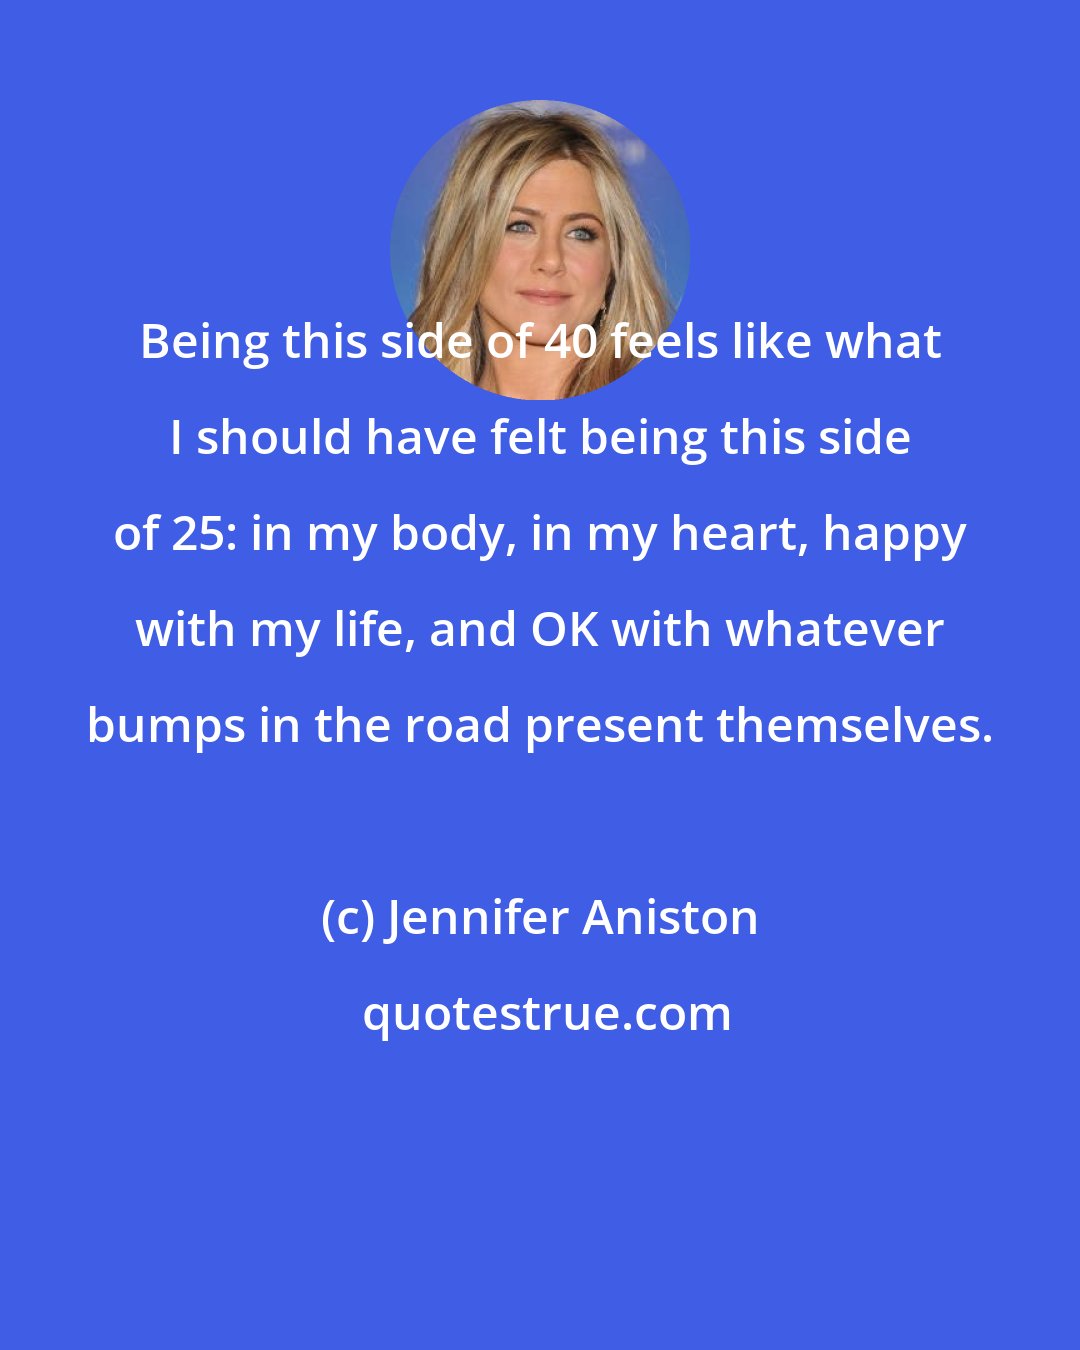 Jennifer Aniston: Being this side of 40 feels like what I should have felt being this side of 25: in my body, in my heart, happy with my life, and OK with whatever bumps in the road present themselves.